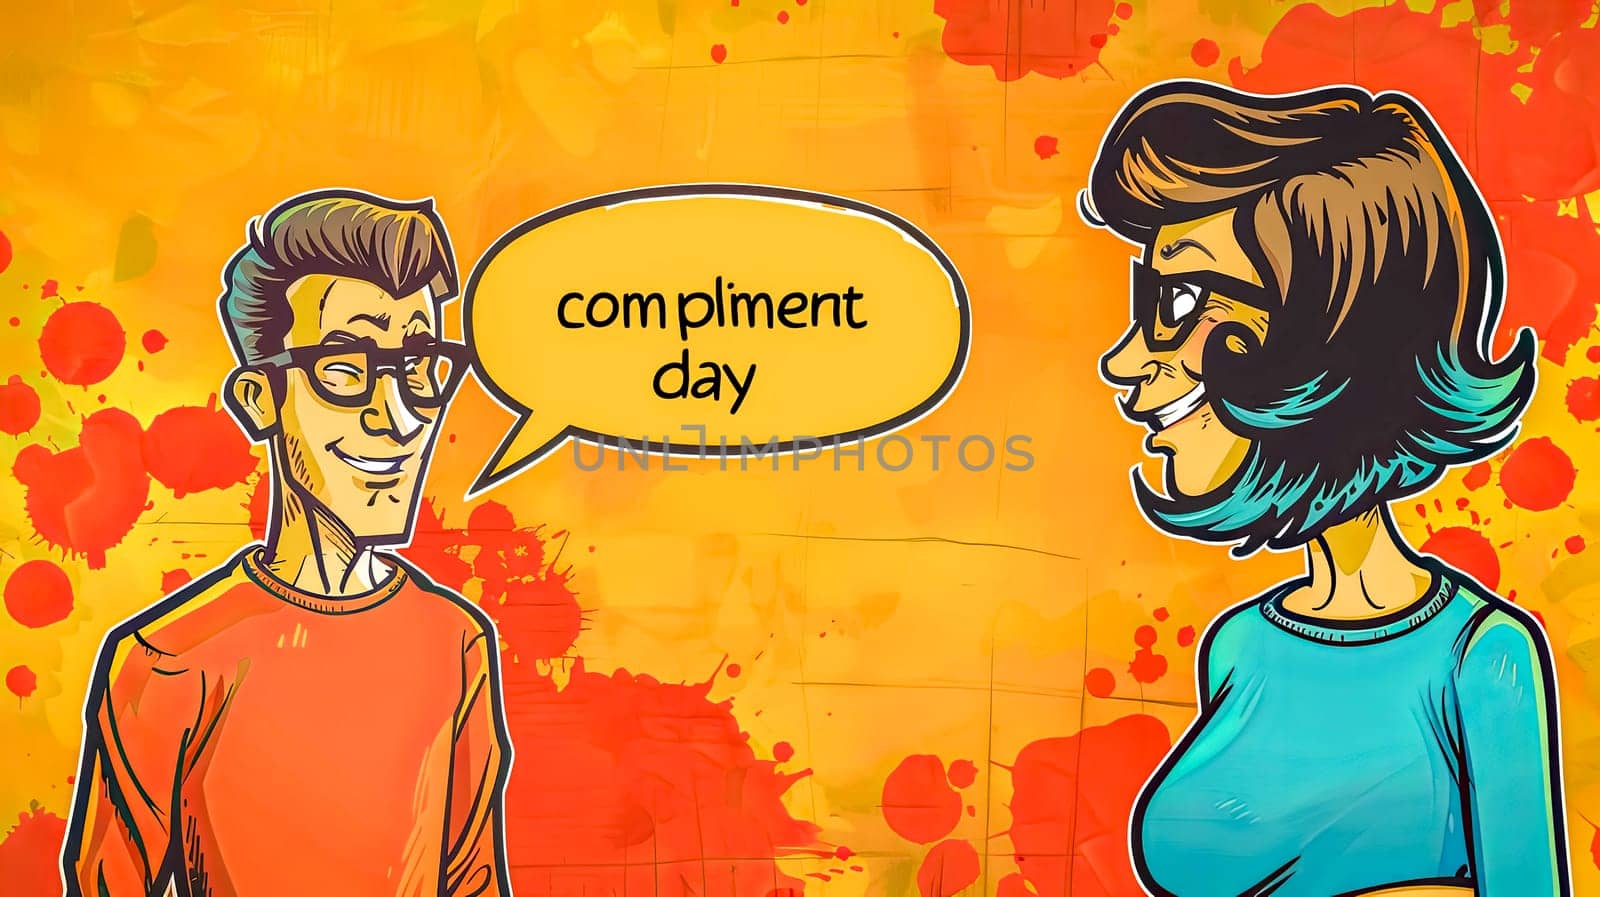 Compliment day concept with cartoon characters by Edophoto